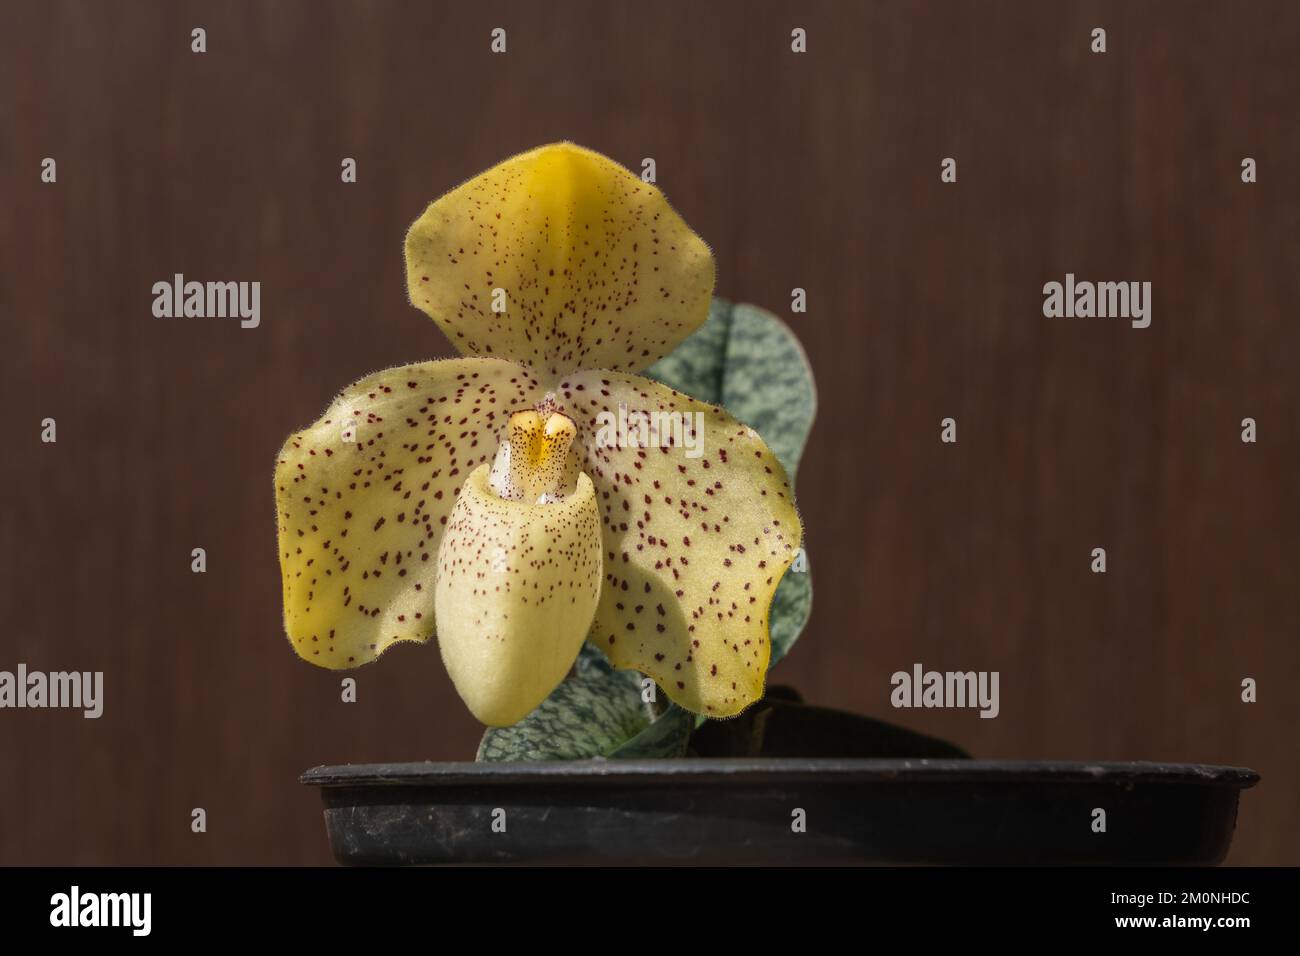 Closeup view of bright yellow with red dots flower of lady slipper orchid species paphiopedilum concolor isolated on dark wooden background Stock Photo